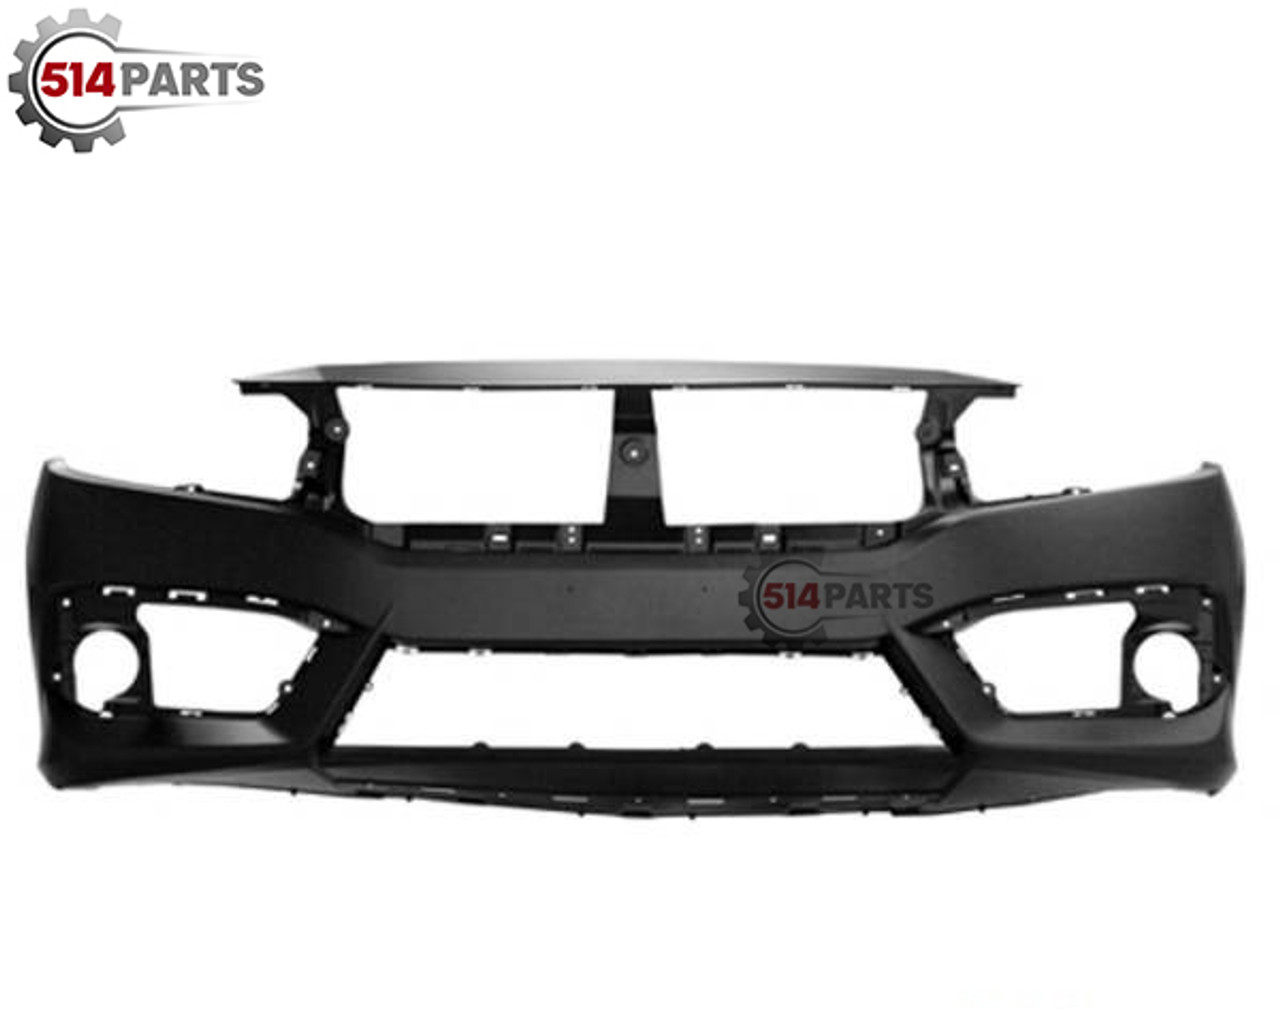 2016 - 2018 HONDA CIVIC SEDAN and COUPE all MODELS exc SI FRONT BUMPER - PARE-CHOC AVANT